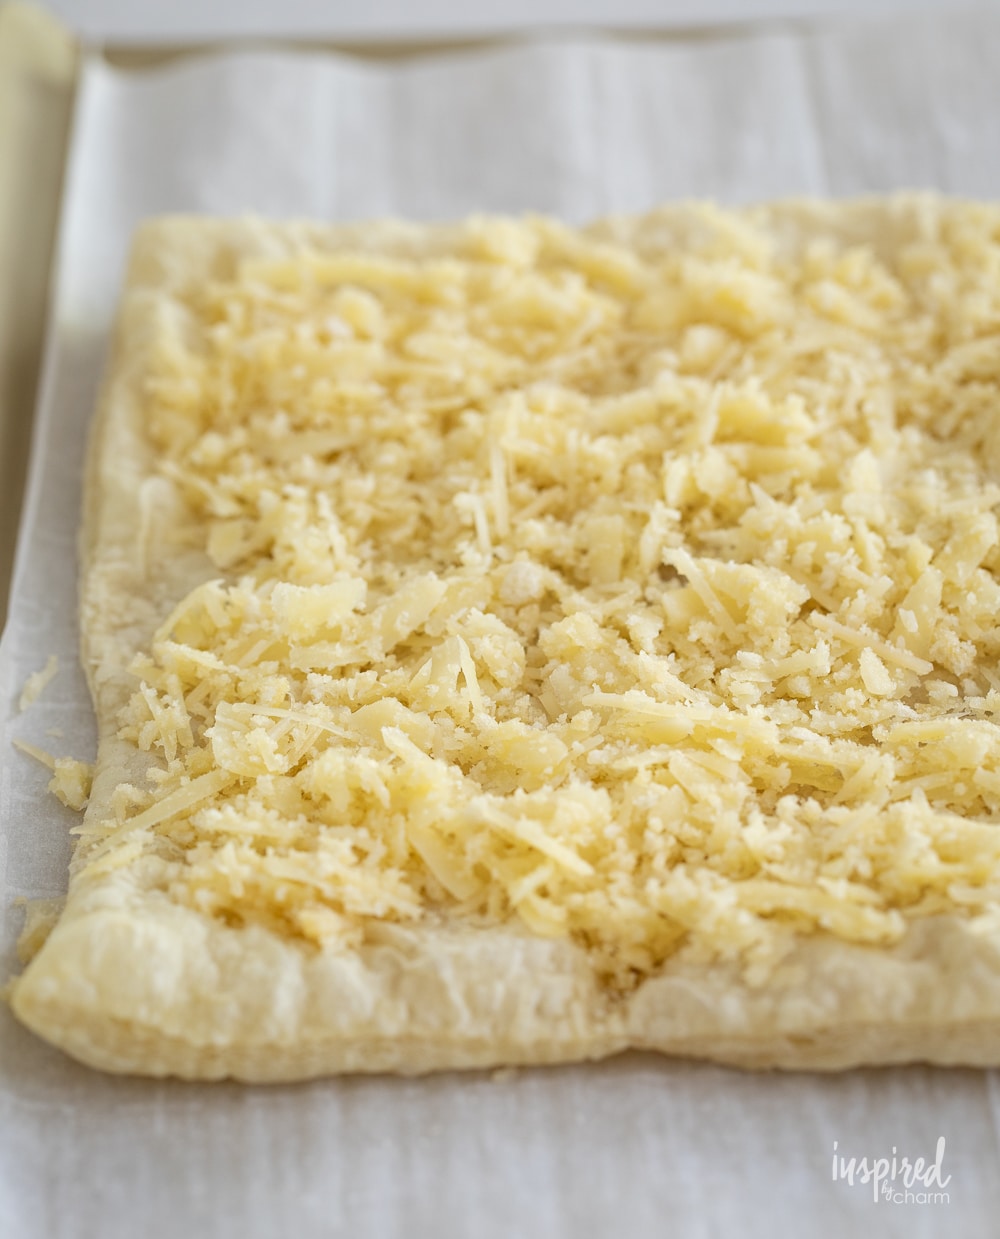 baked puff pastry sheet topped with cheese.